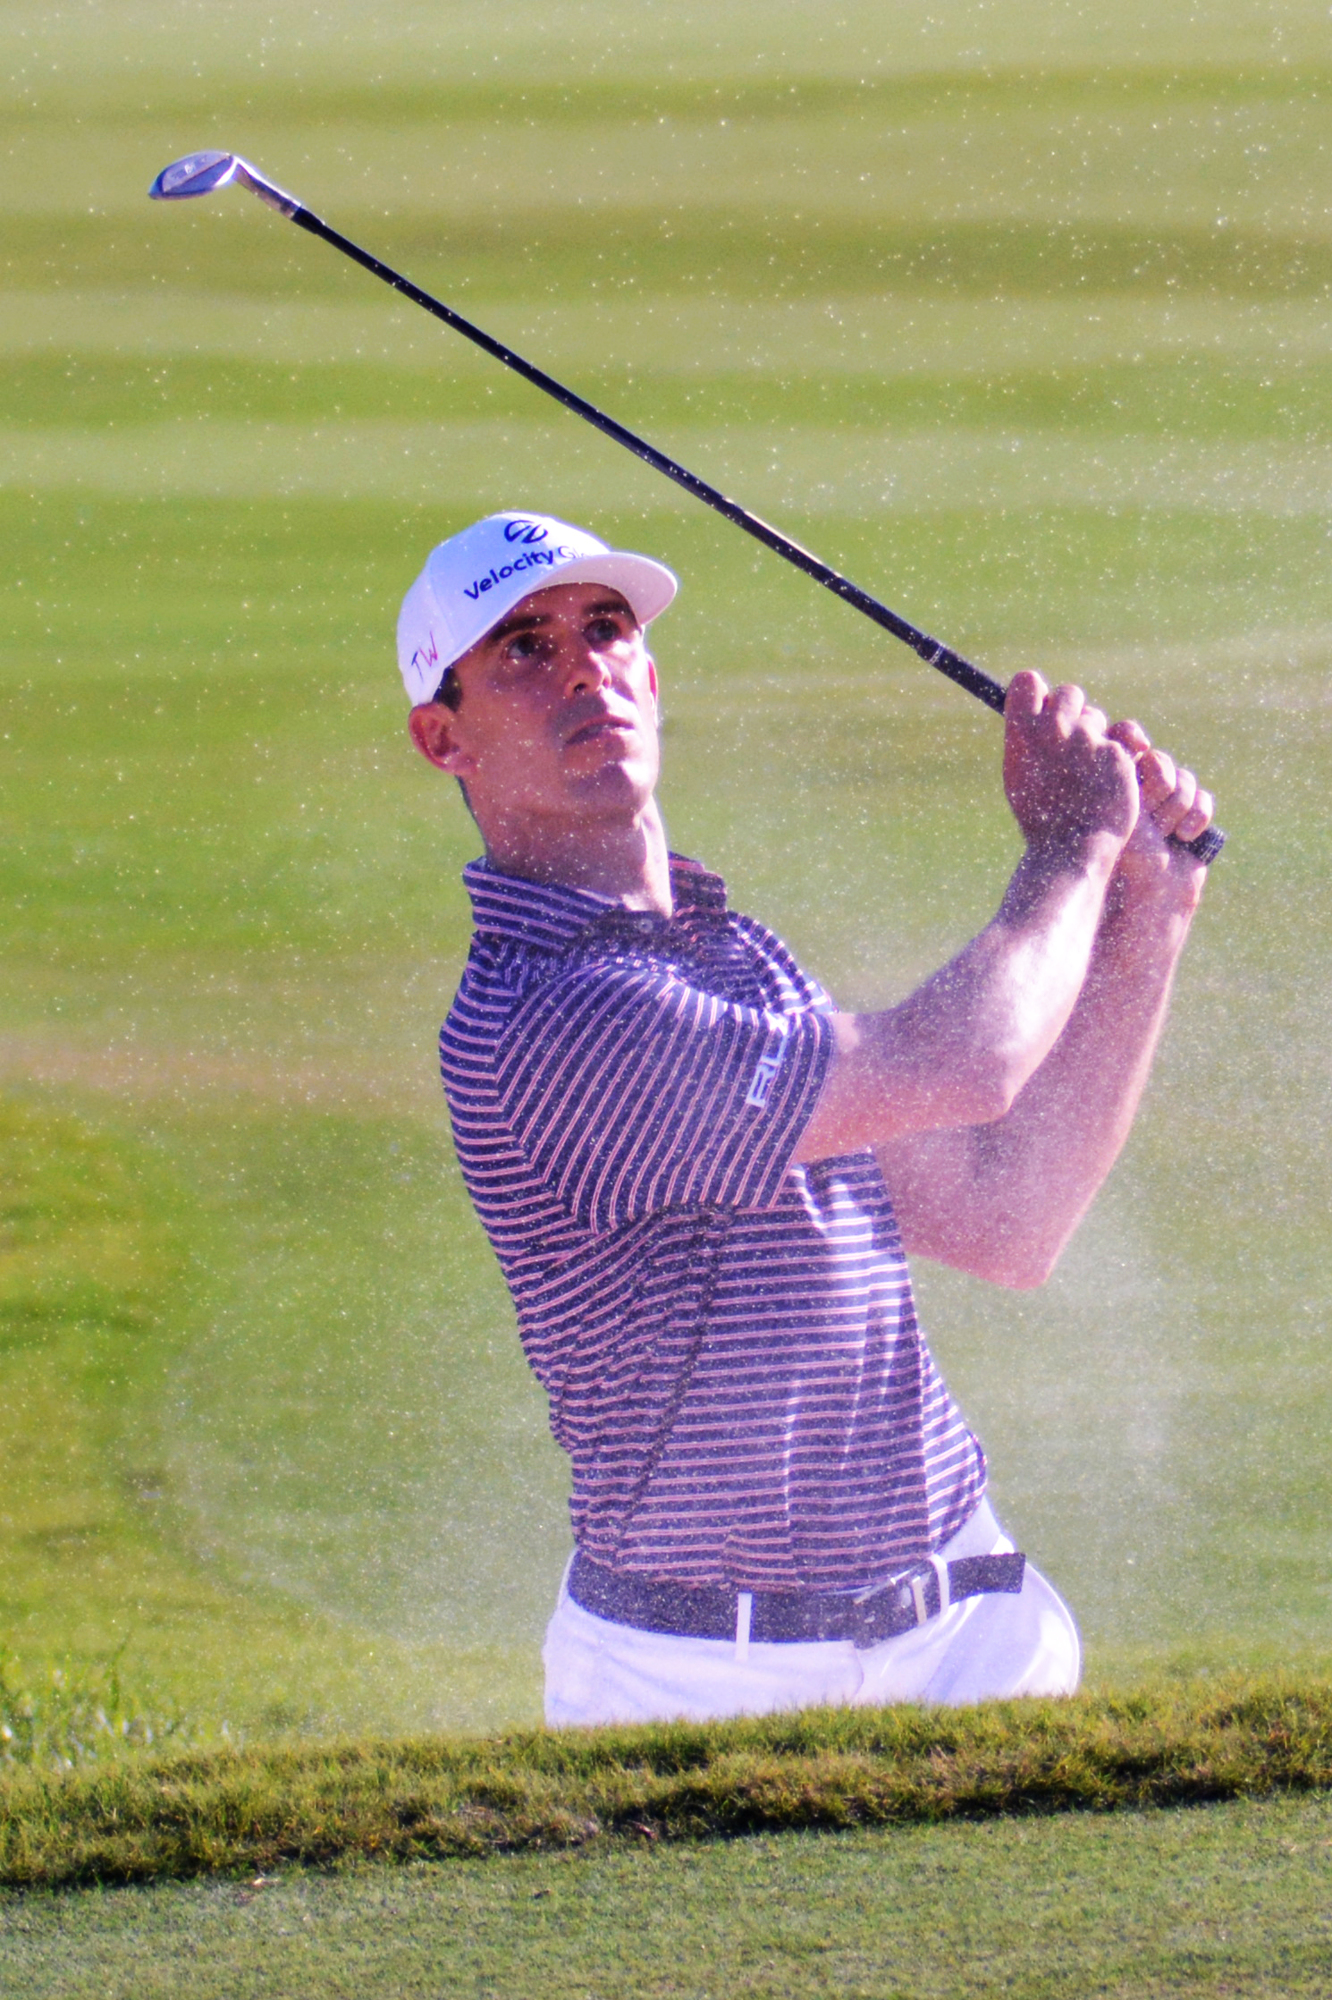 Billy Horschel, who finished 15 under par (T2), said he would love to return to The Concession and compared the greens to the greens at Augusta National Golf Club.